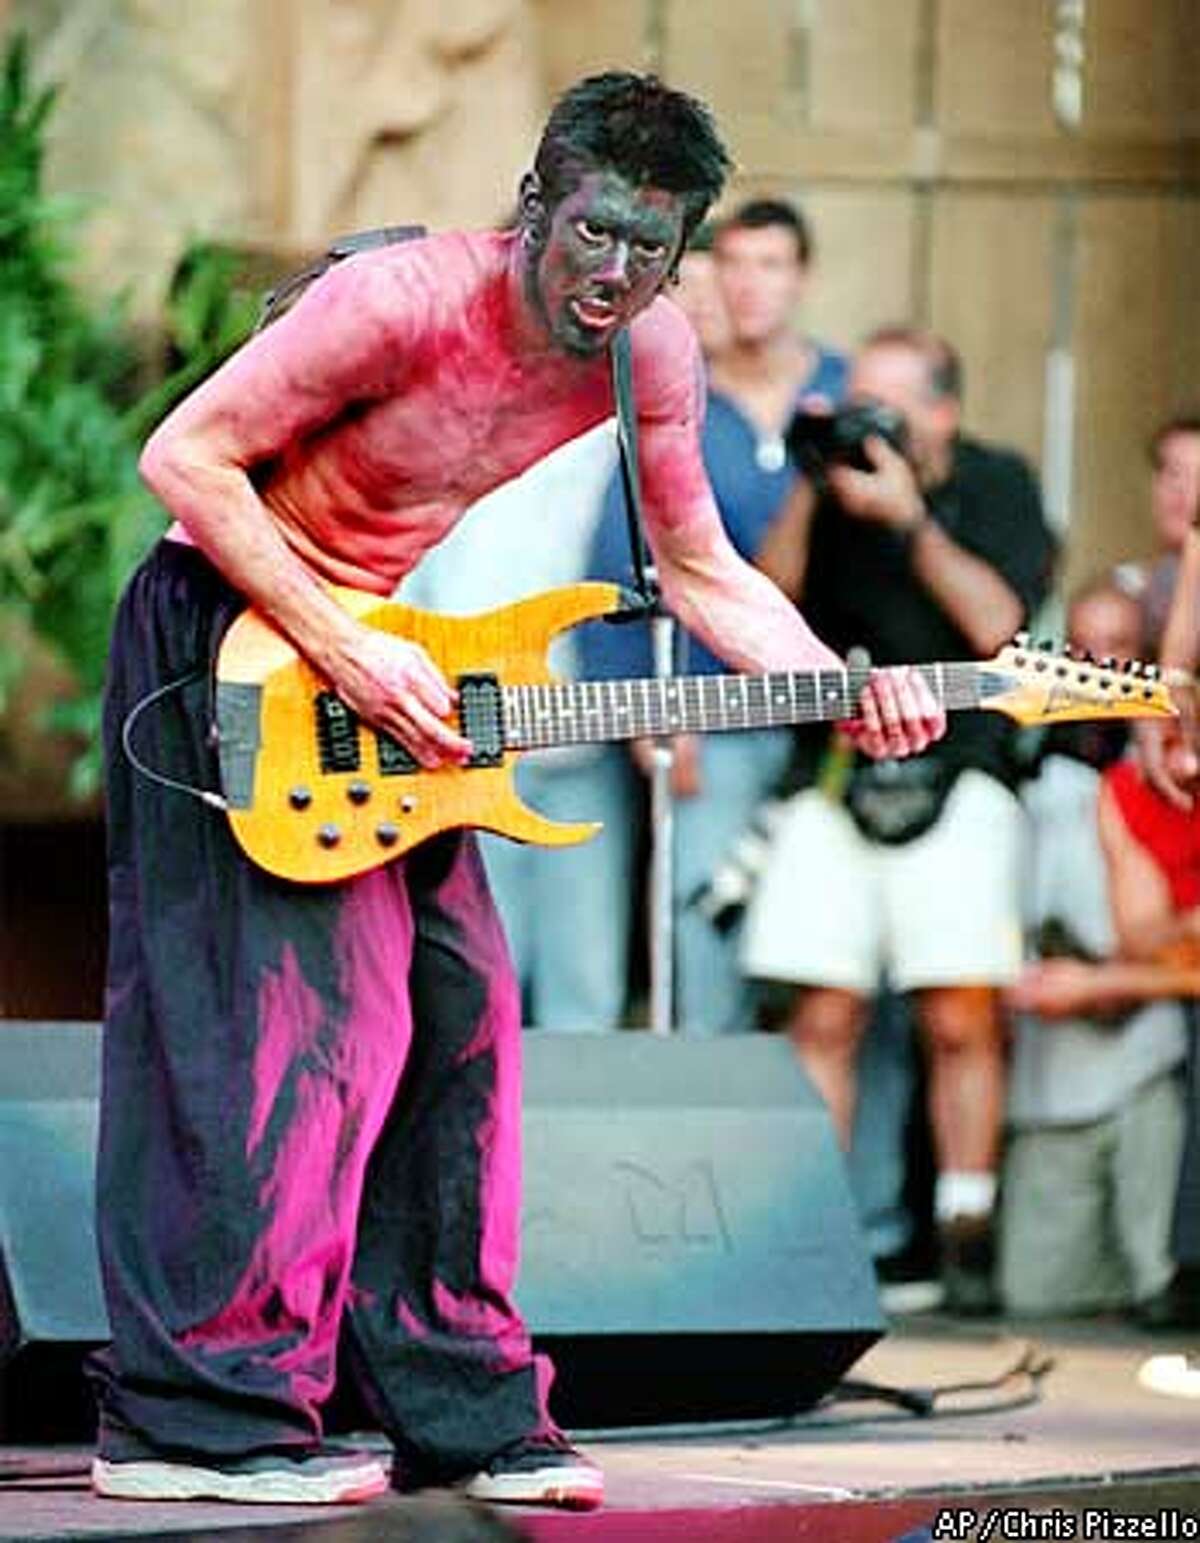 Limp Bizkit guitarist, Wes Borland, performs during his band's set at the annual KROQ Weenie Roast summer concert Sunday, June 20, 1999 at Irvine Meadows Amphitheatre in Irvine, Calif. Limp Bizkit performed along with other popular alternative-rock acts including Sugar Ray, Blink-182, Metallica and the Red Hot Chili Peppers. (AP Photo/Chris Pizzello)